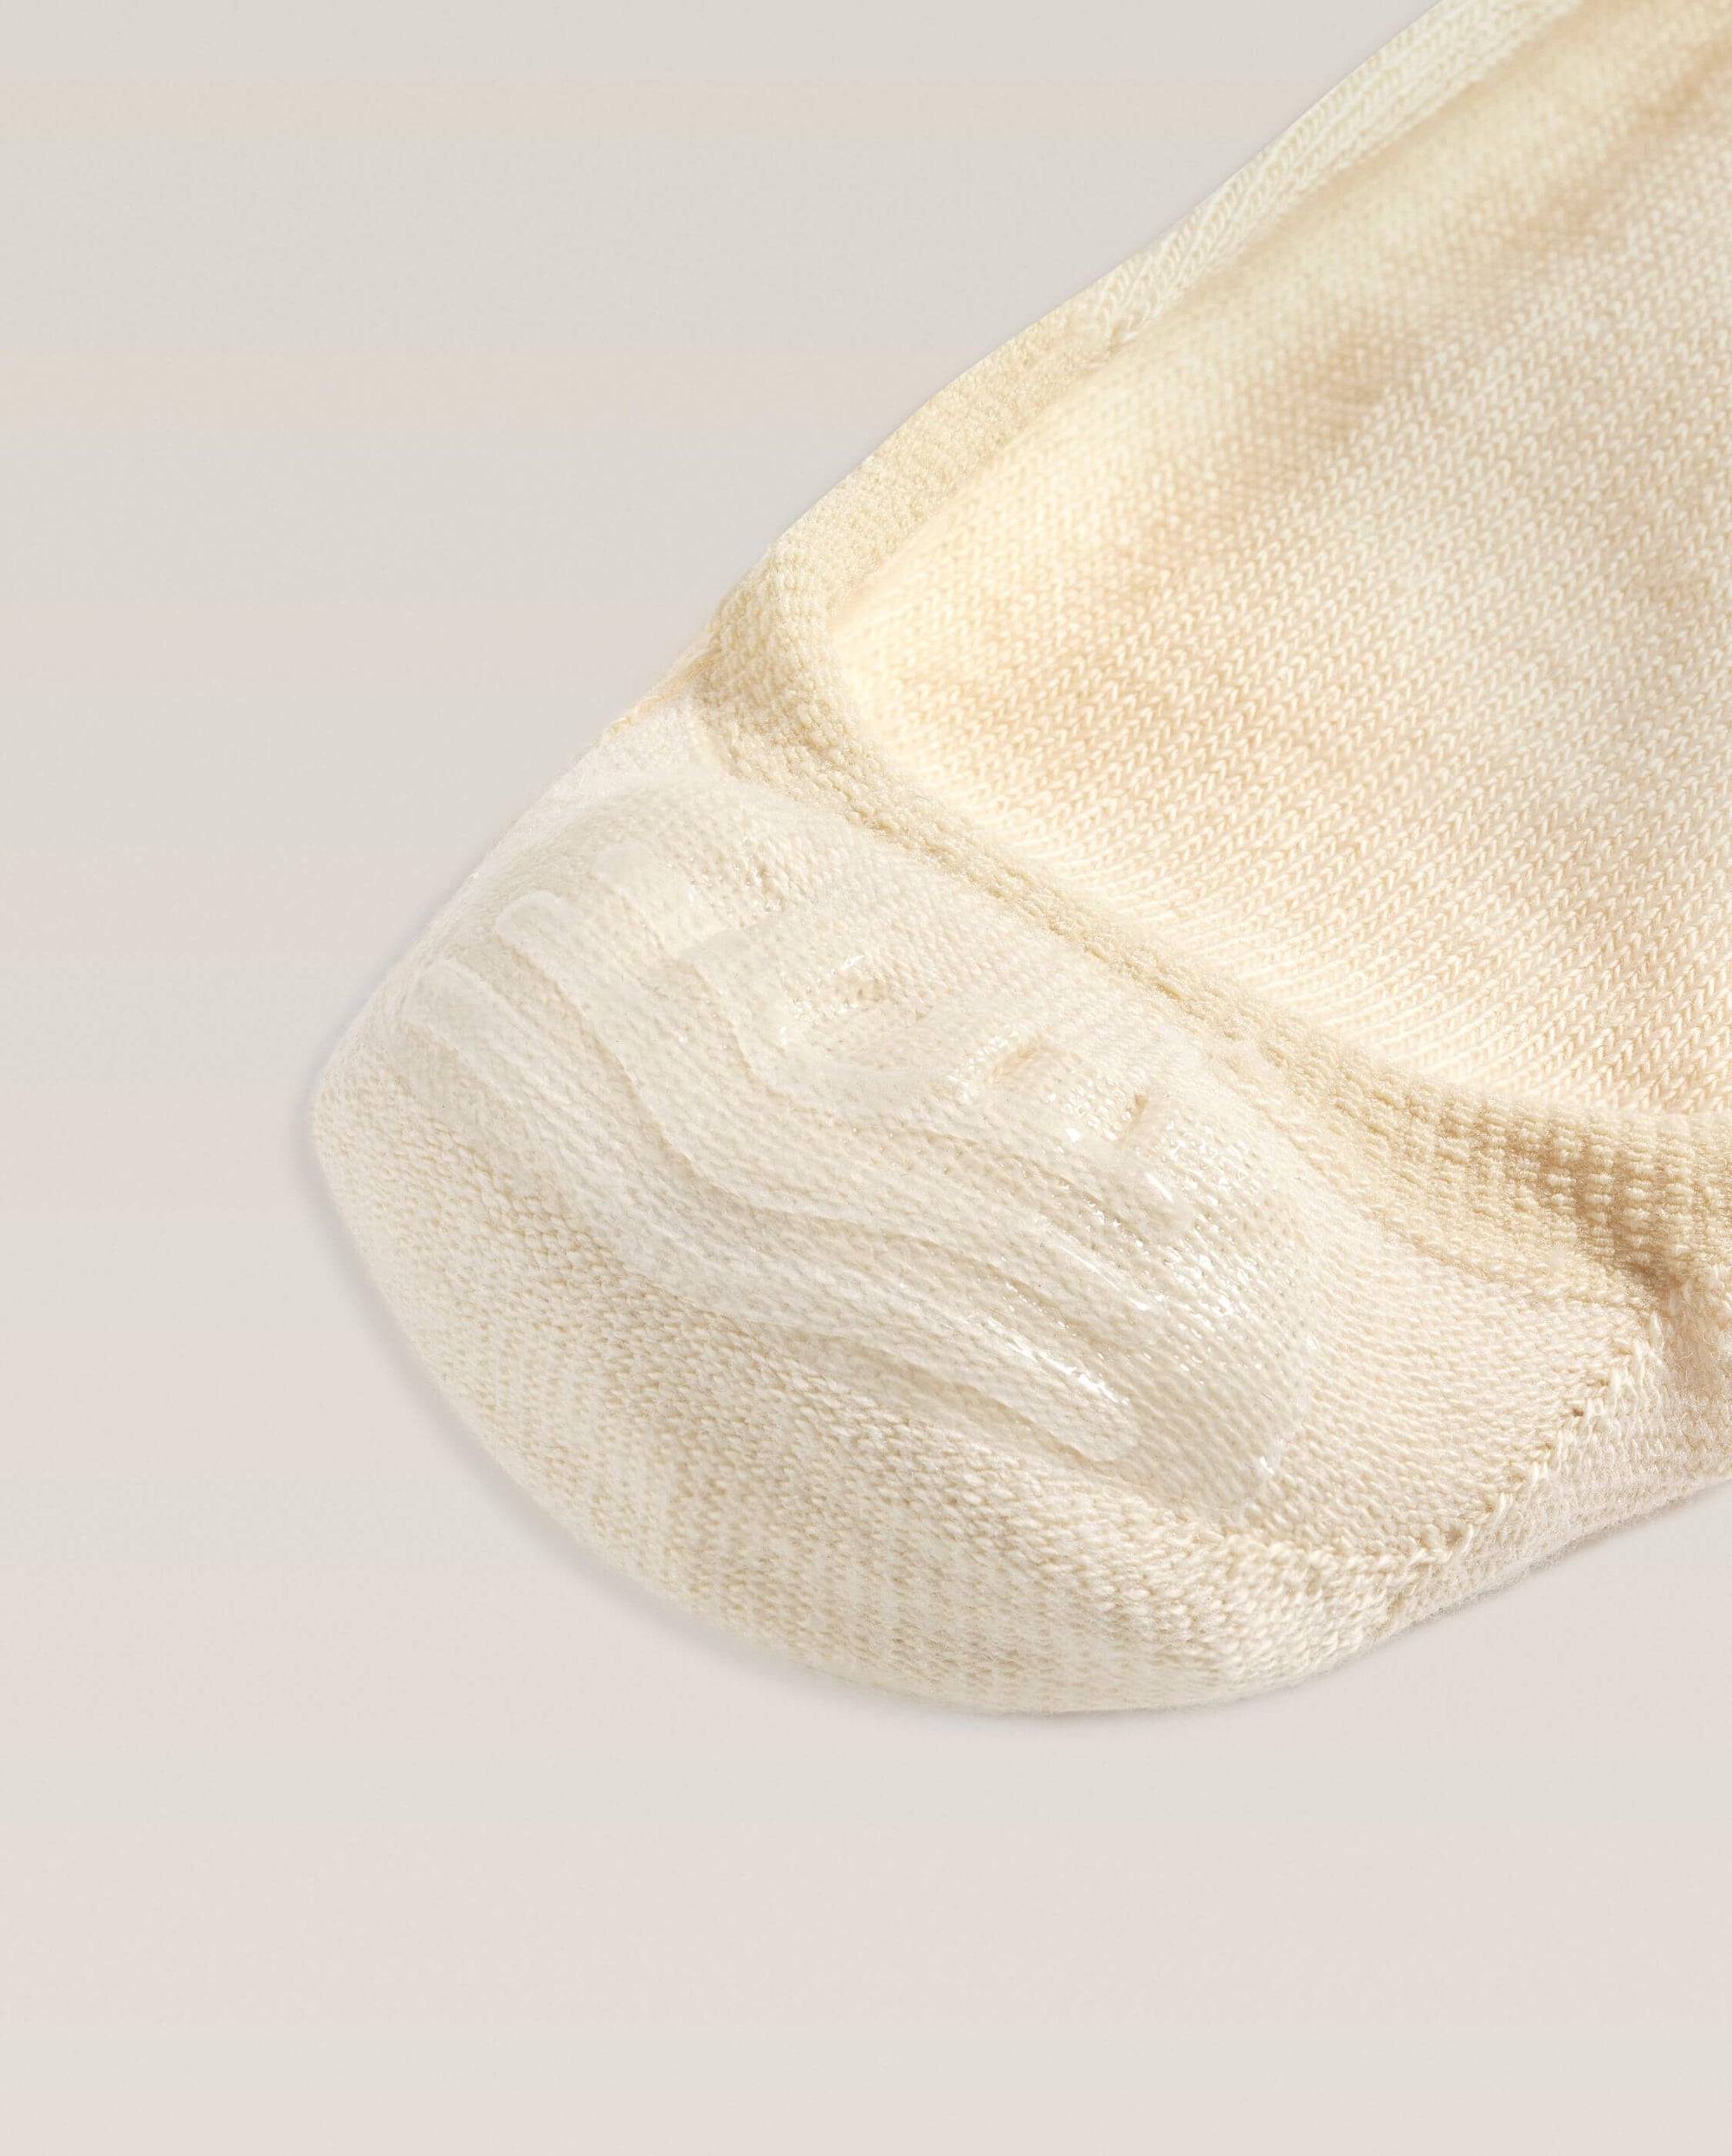 Invisible socks, made of bamboo and organic cotton